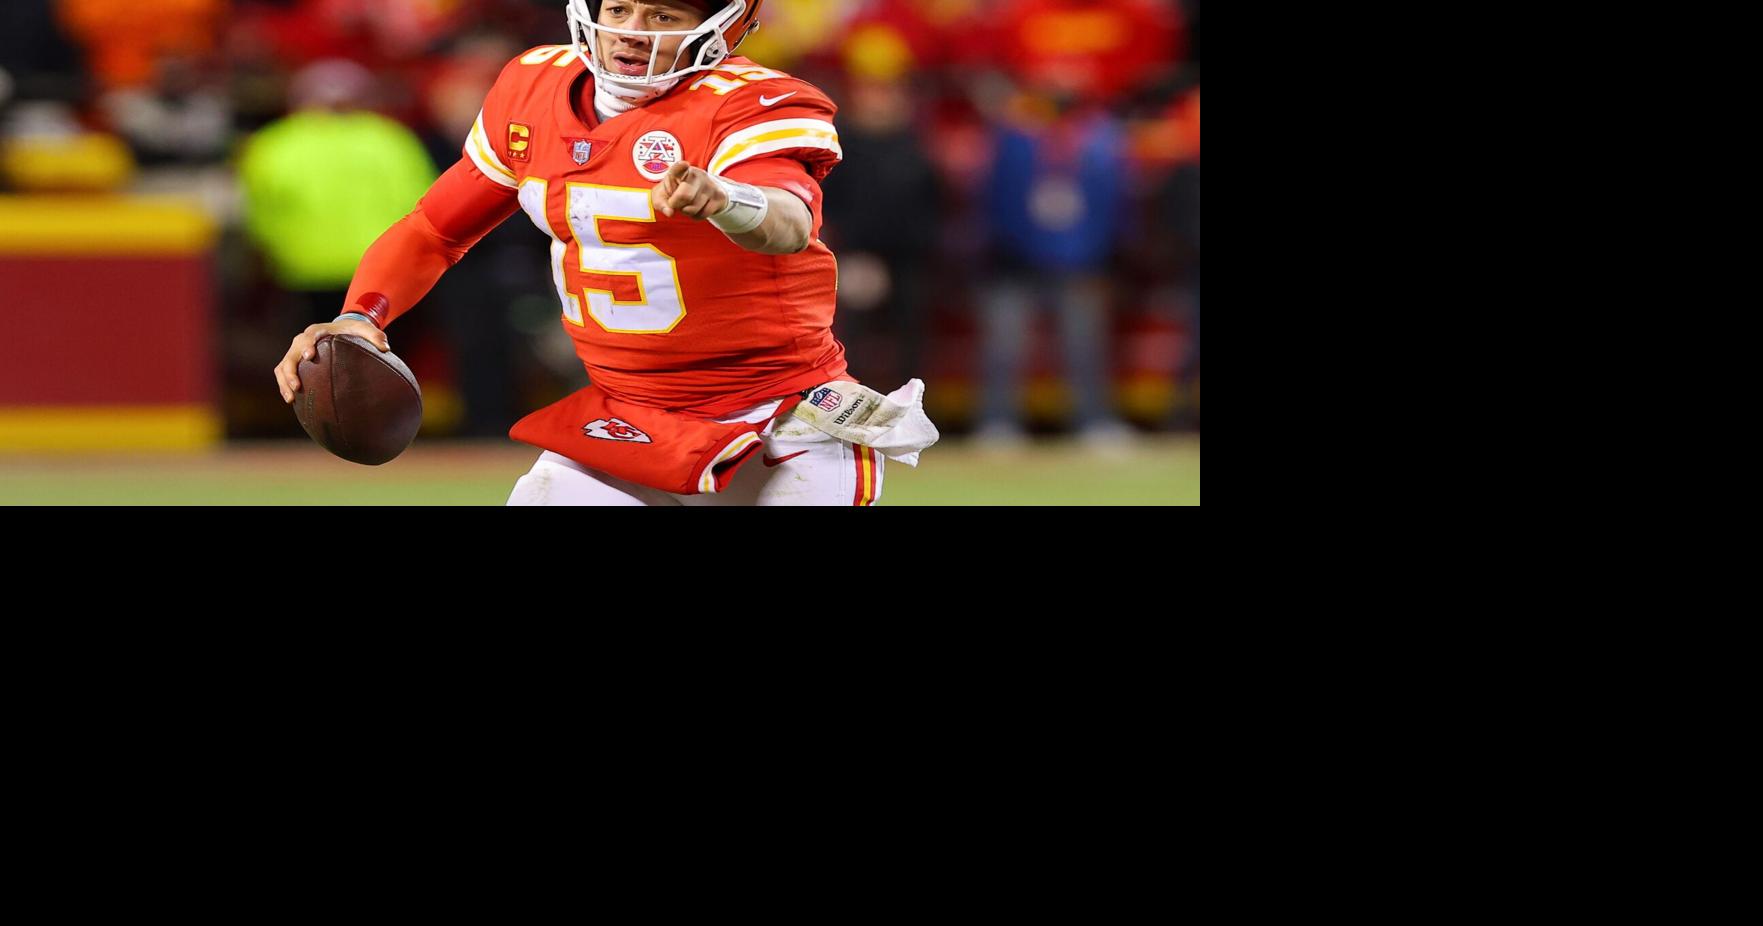 Chiefs are Super Bowl-bound after last-second field goal beats Bengals,  23-20 - MarketWatch